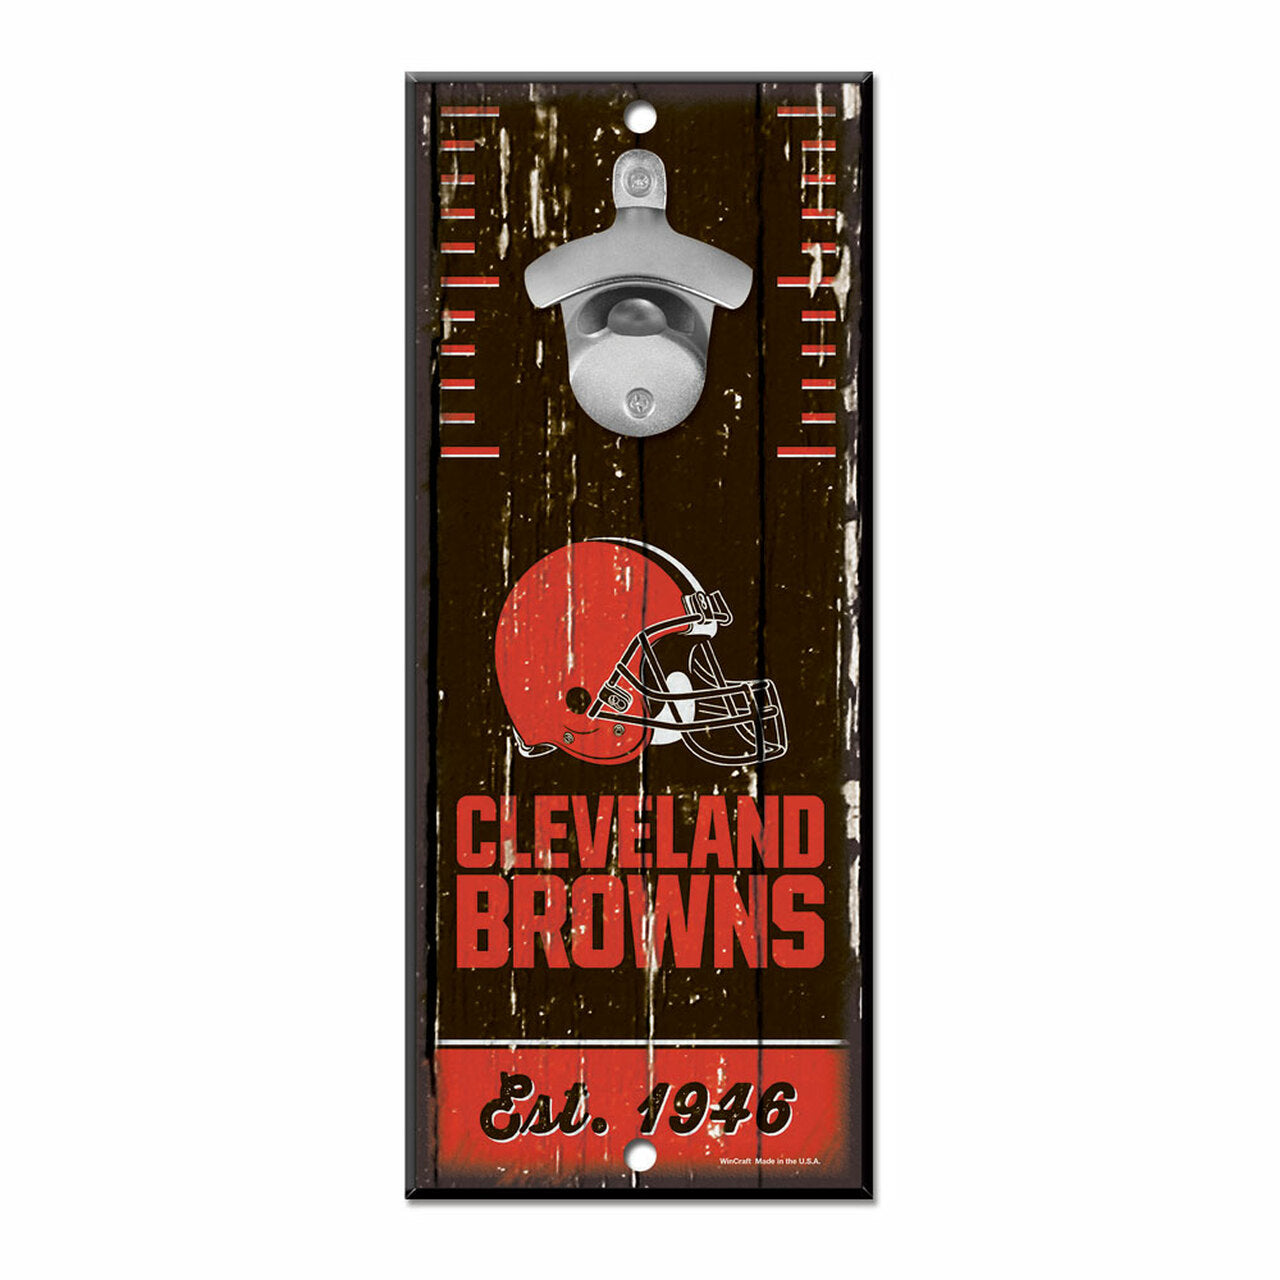 Cleveland Browns 5" x 11" Bottle Opener Wood Sign by Wincraft